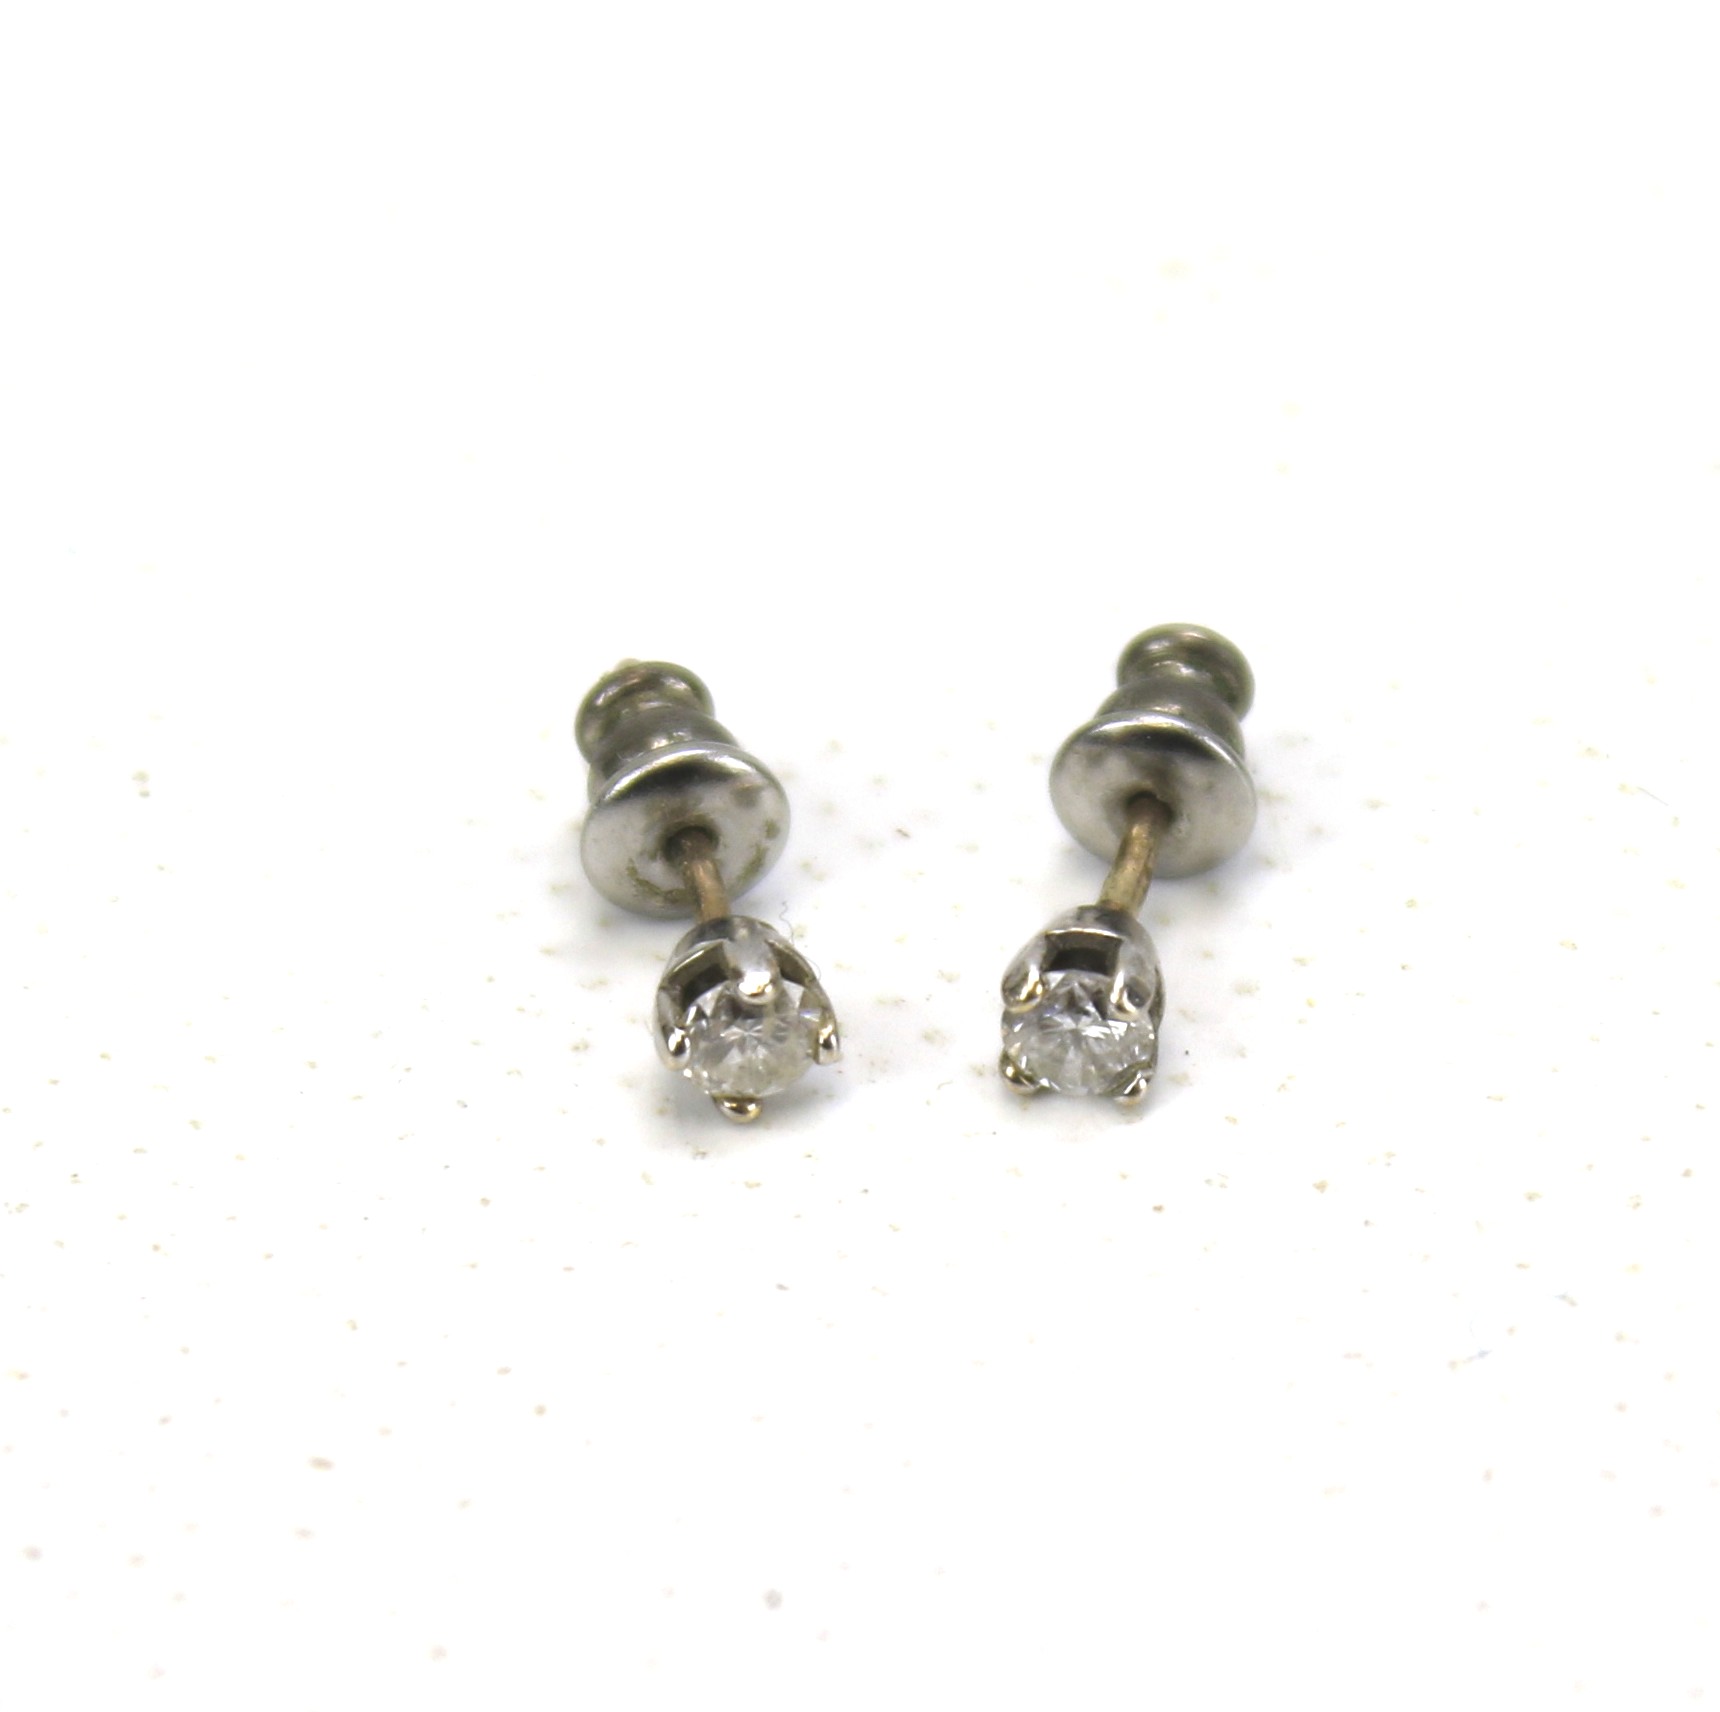 A pair of 9ct gold and diamond stud earrings. Approximately 0.